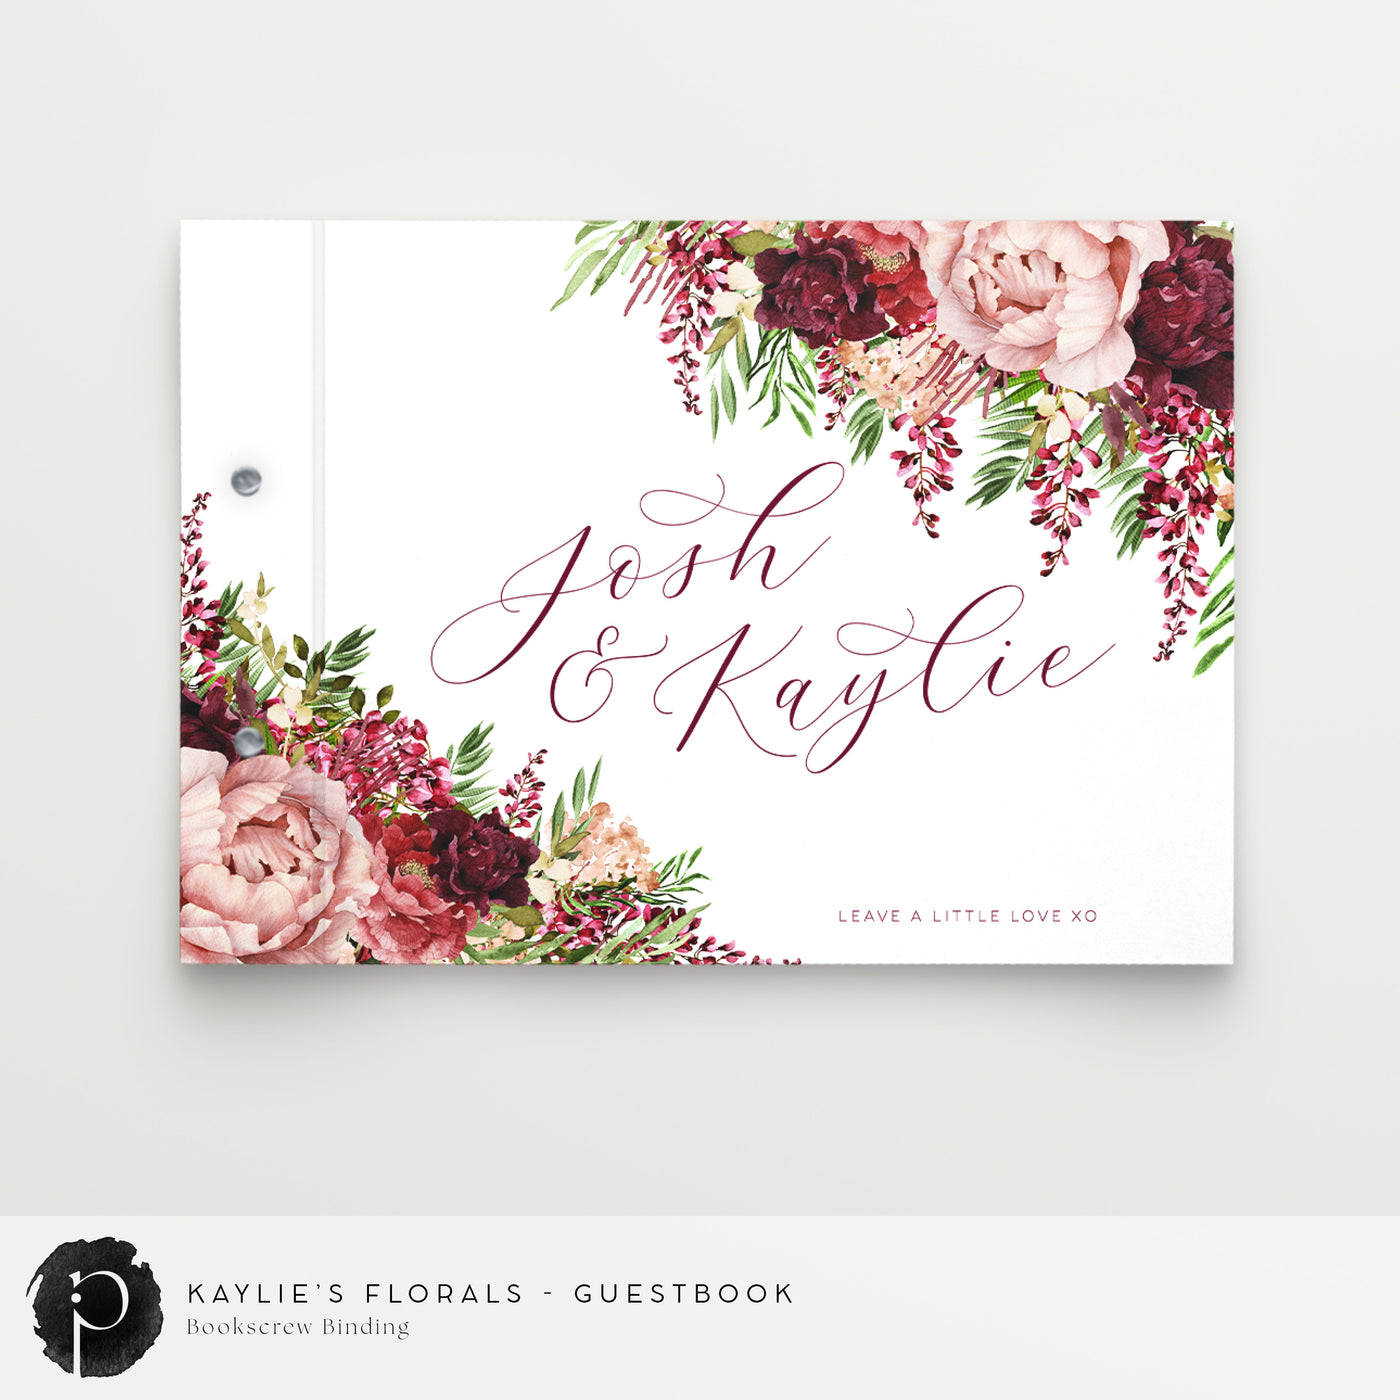 Kaylie's Florals - Guestbook